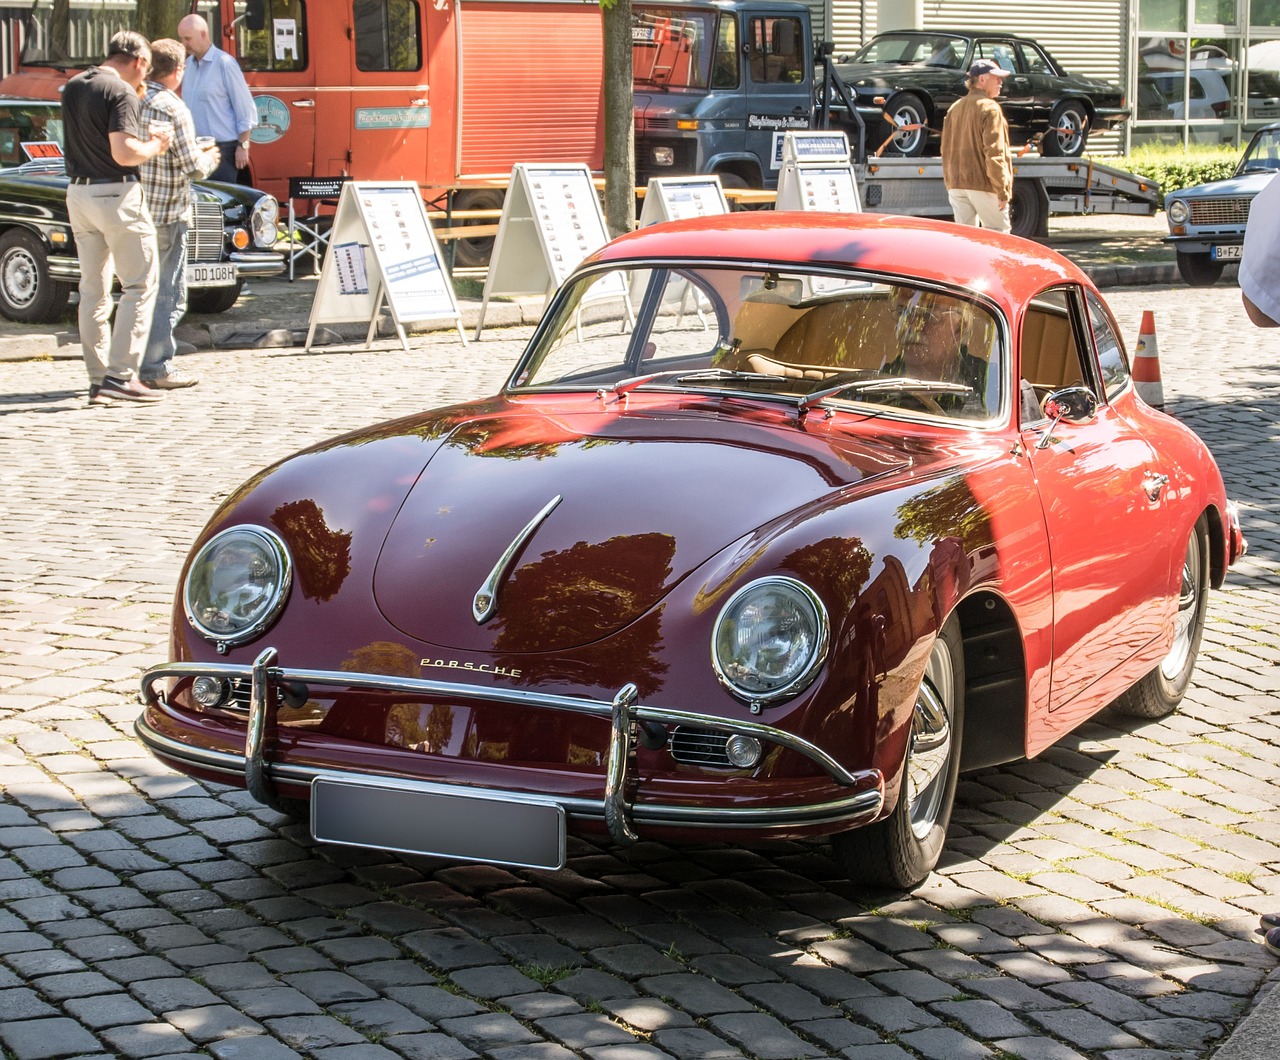 How Can Porsche Restoration Increase the Value of Your Car?